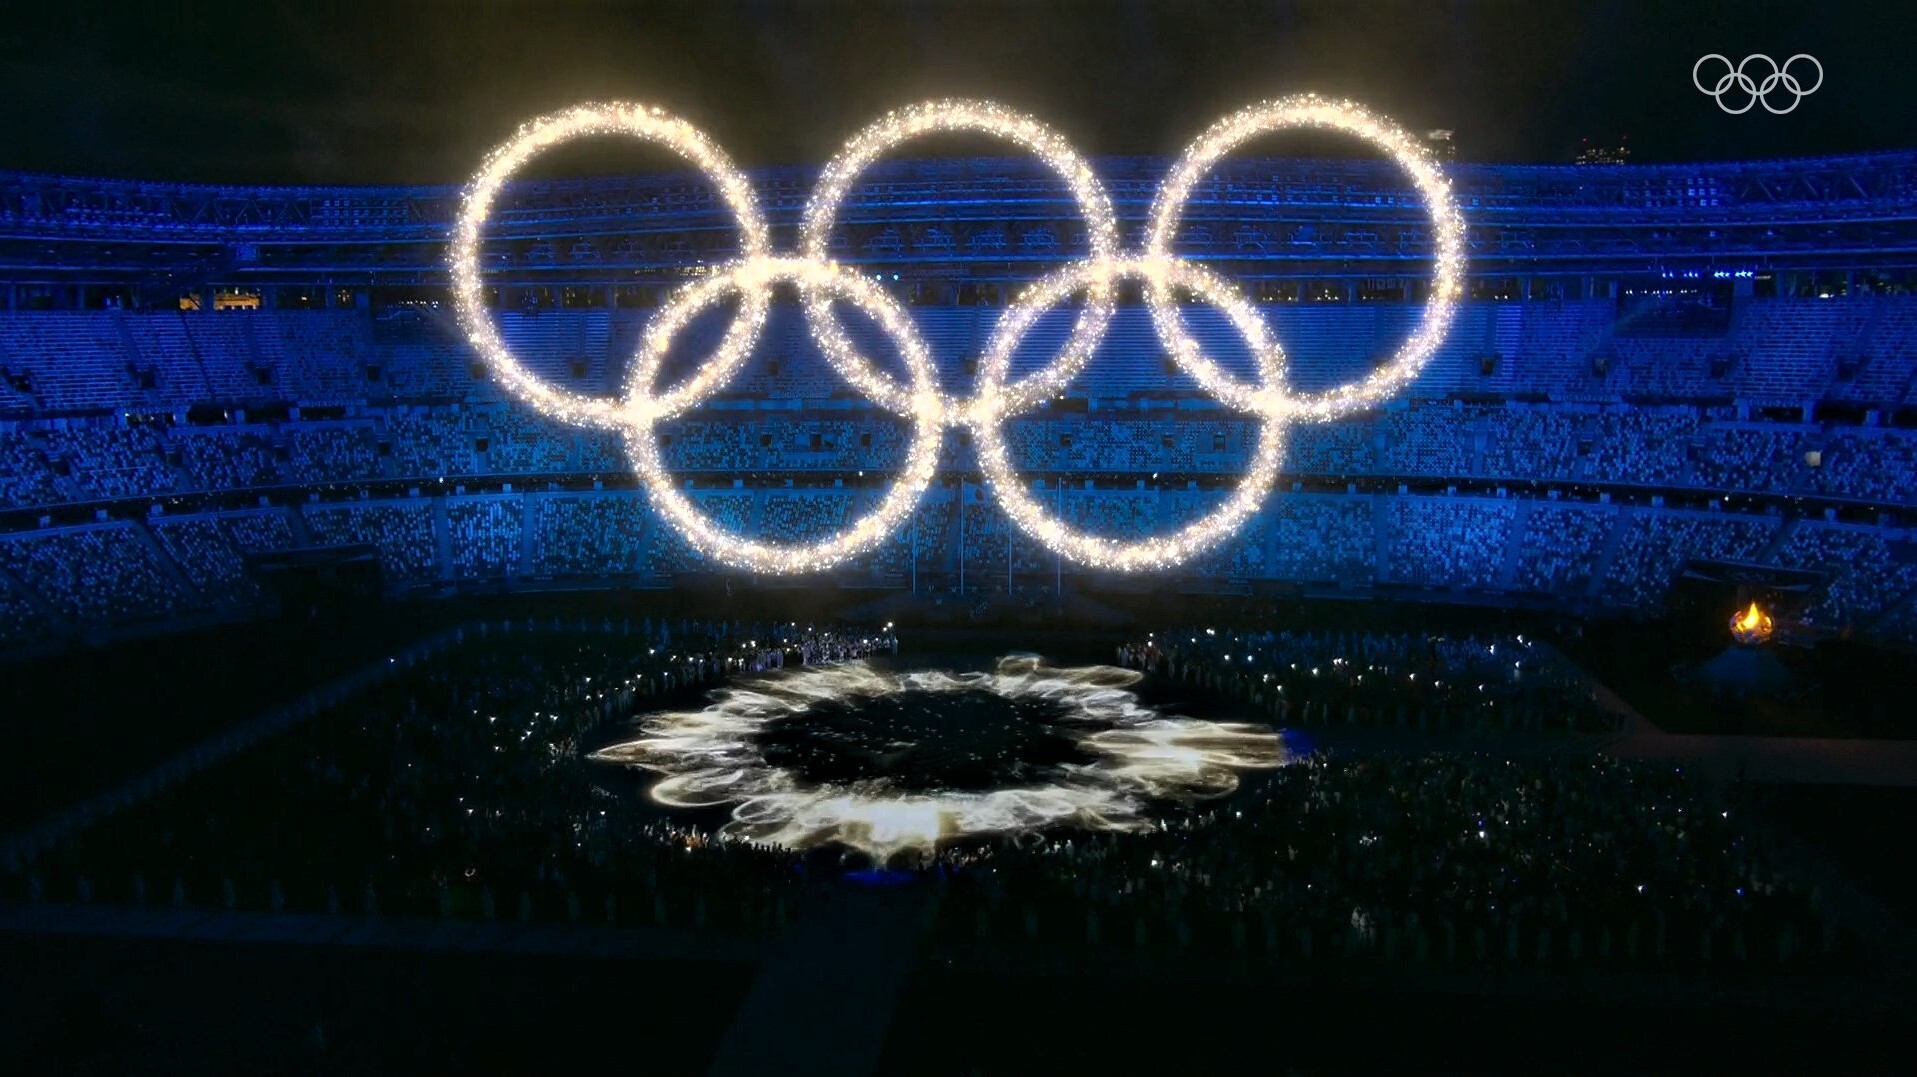 Tokyo Olympics closing ceremony special effects, secret drone light show